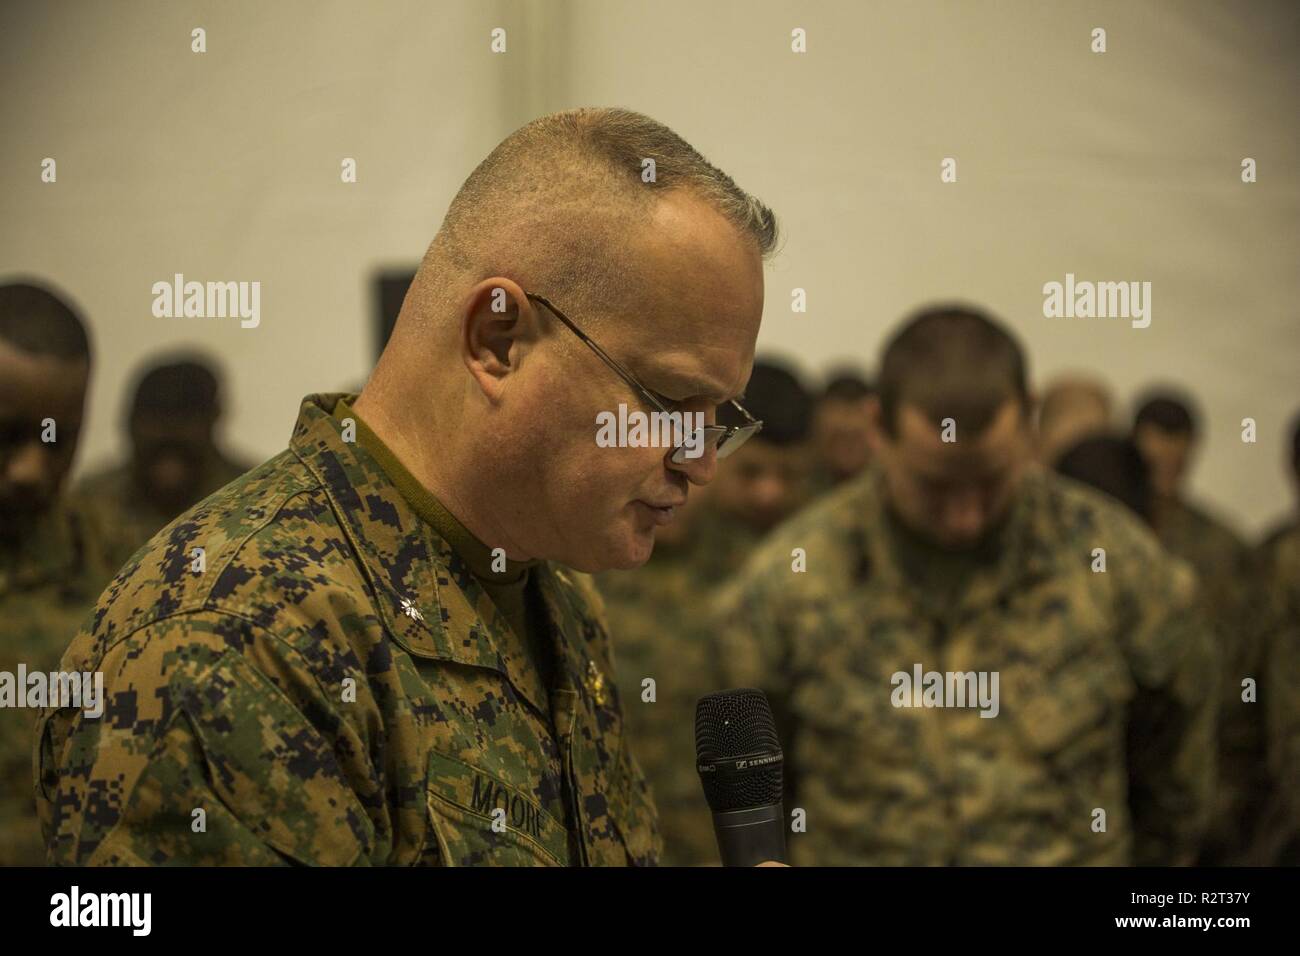 U.S. Navy Chaplain Commander Robert Moore with II Marine Expeditionary Force gives the invocation during a cake cutting ceremony celebrating the Marine Corps’ 243rd birthday on at Vaernes Air Station, Norway, Nov. 10, 2018. The ceremony is held at the conclusion of Exercise Trident Juncture 18, an exercise in place to enhance the U.S. and NATO Allies’ and partners’ abilities to work together collectively to conduct military operations under challenging conditions. Stock Photo